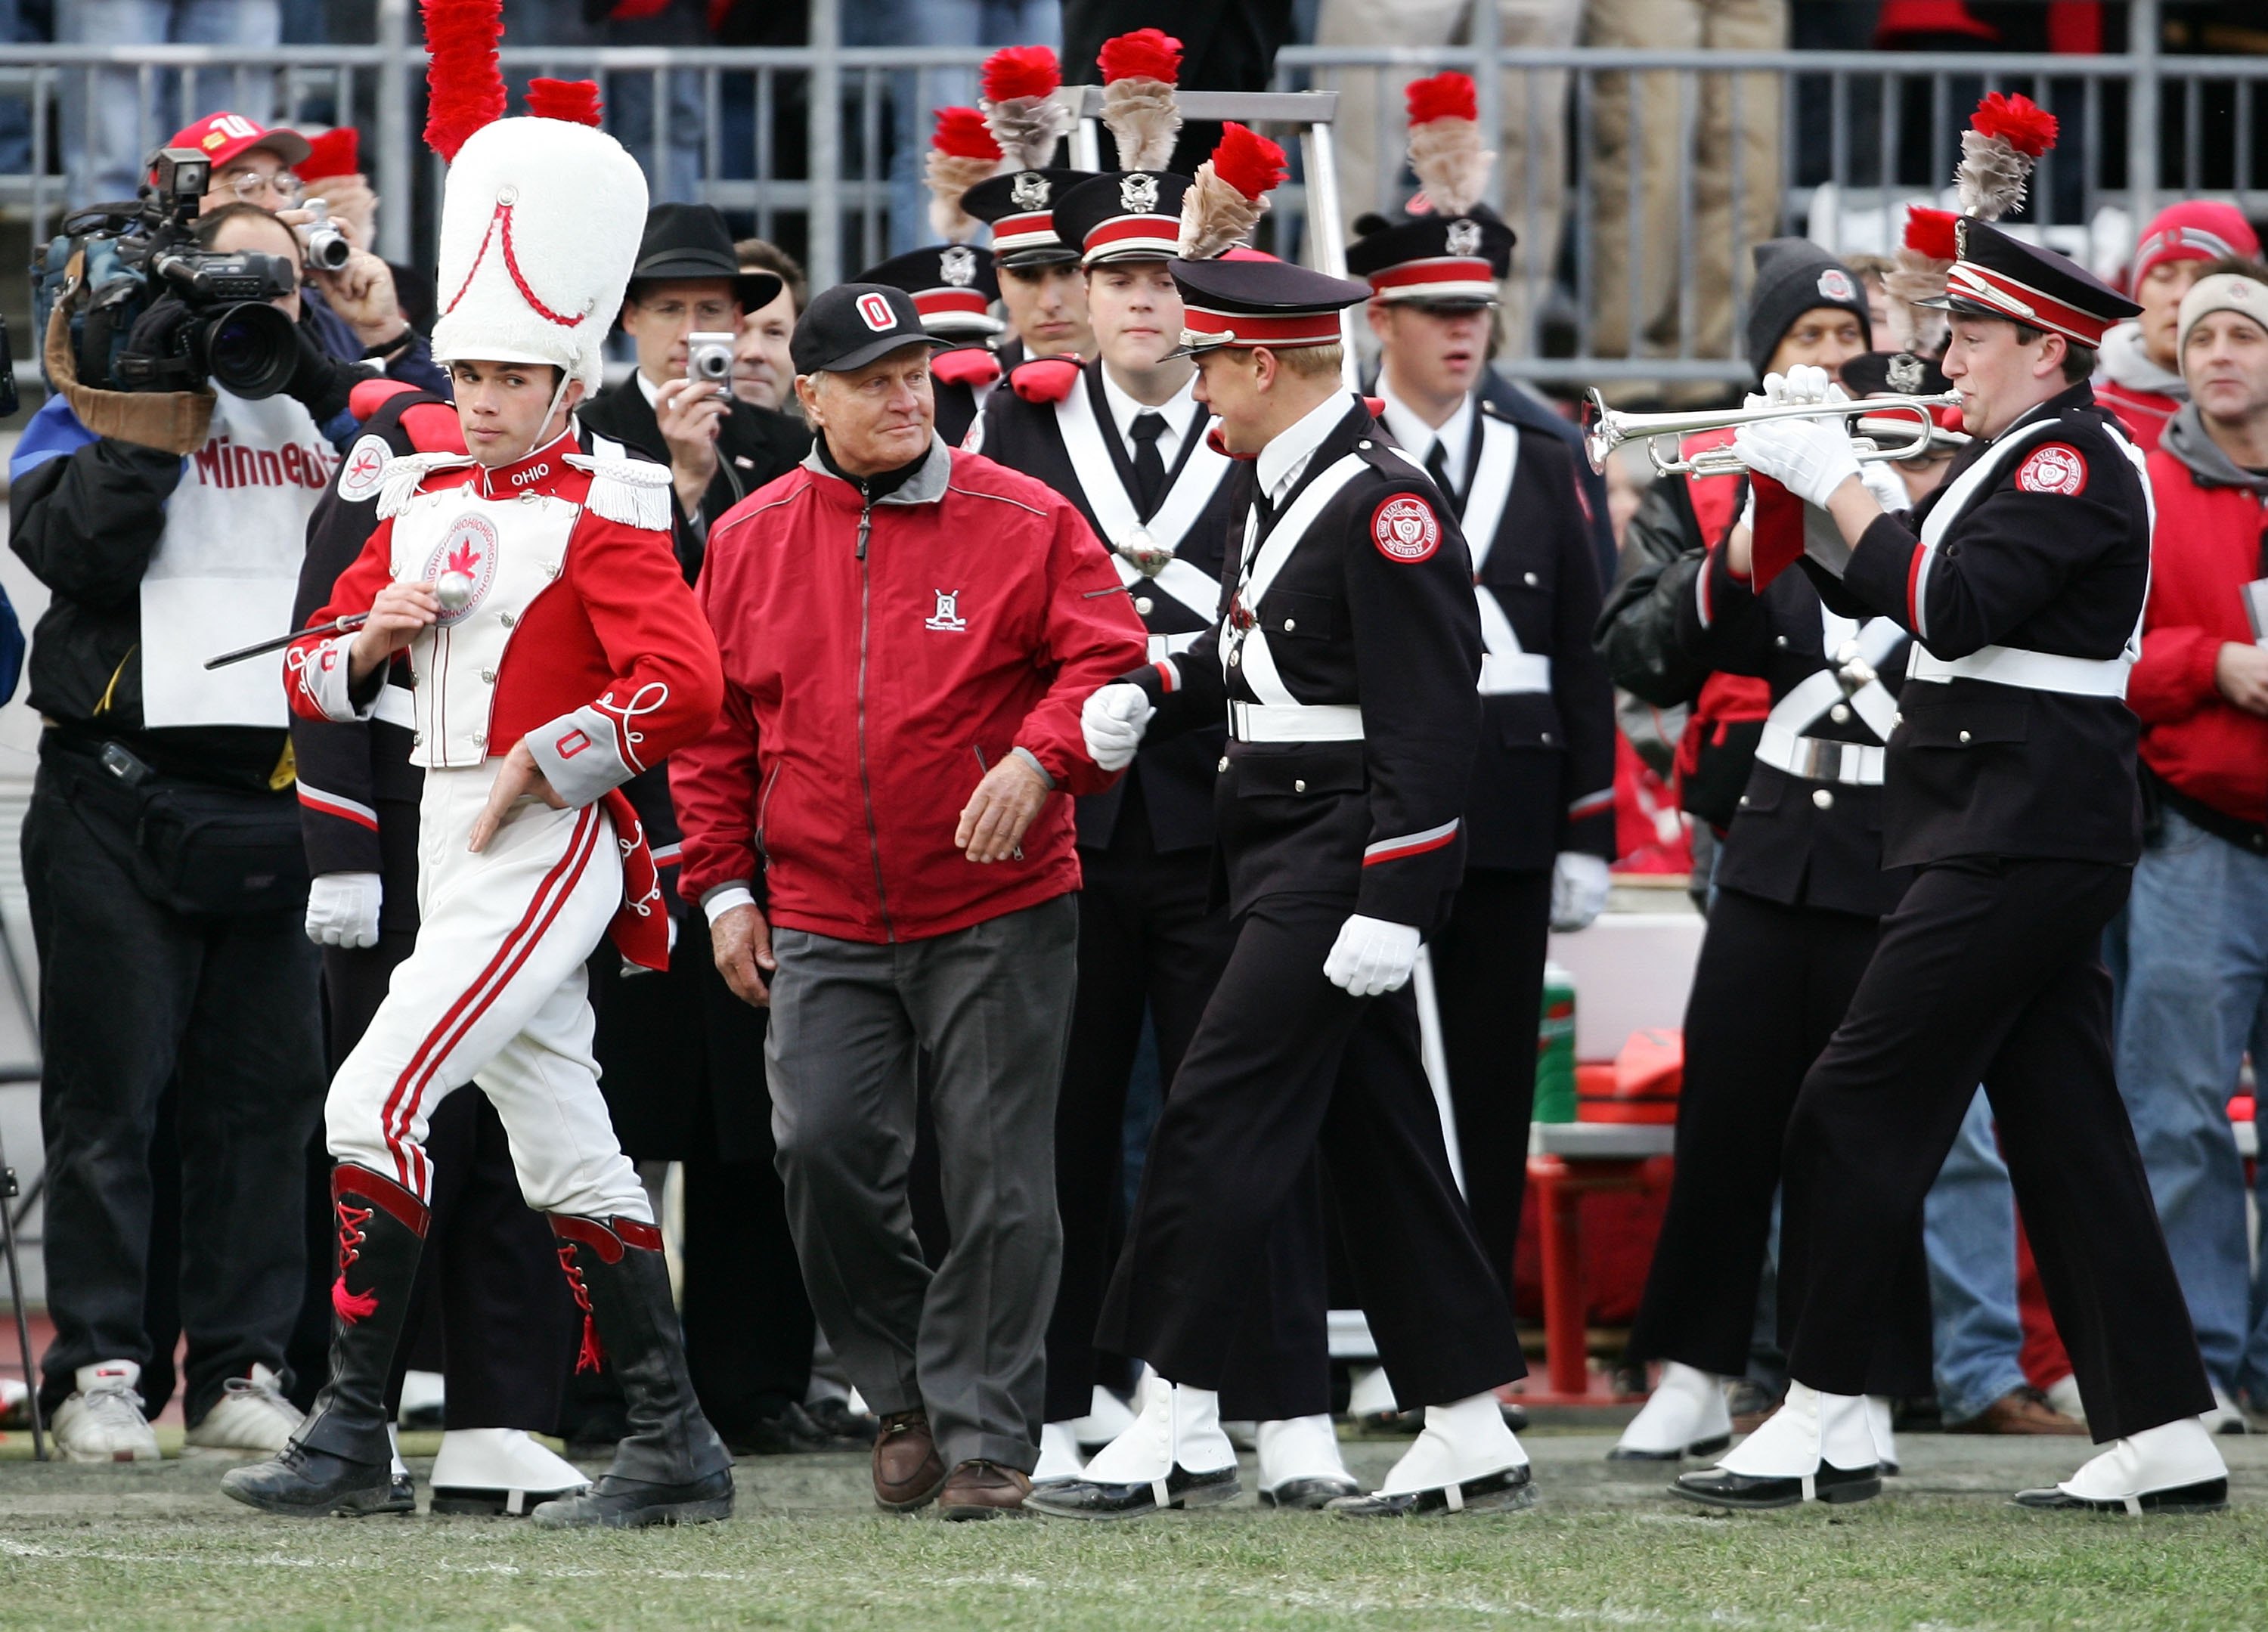 Drum major Stewart Kitchen leads golf legend Jack Nicklaus onto the field to "dot the i" in 2006. (Getty)